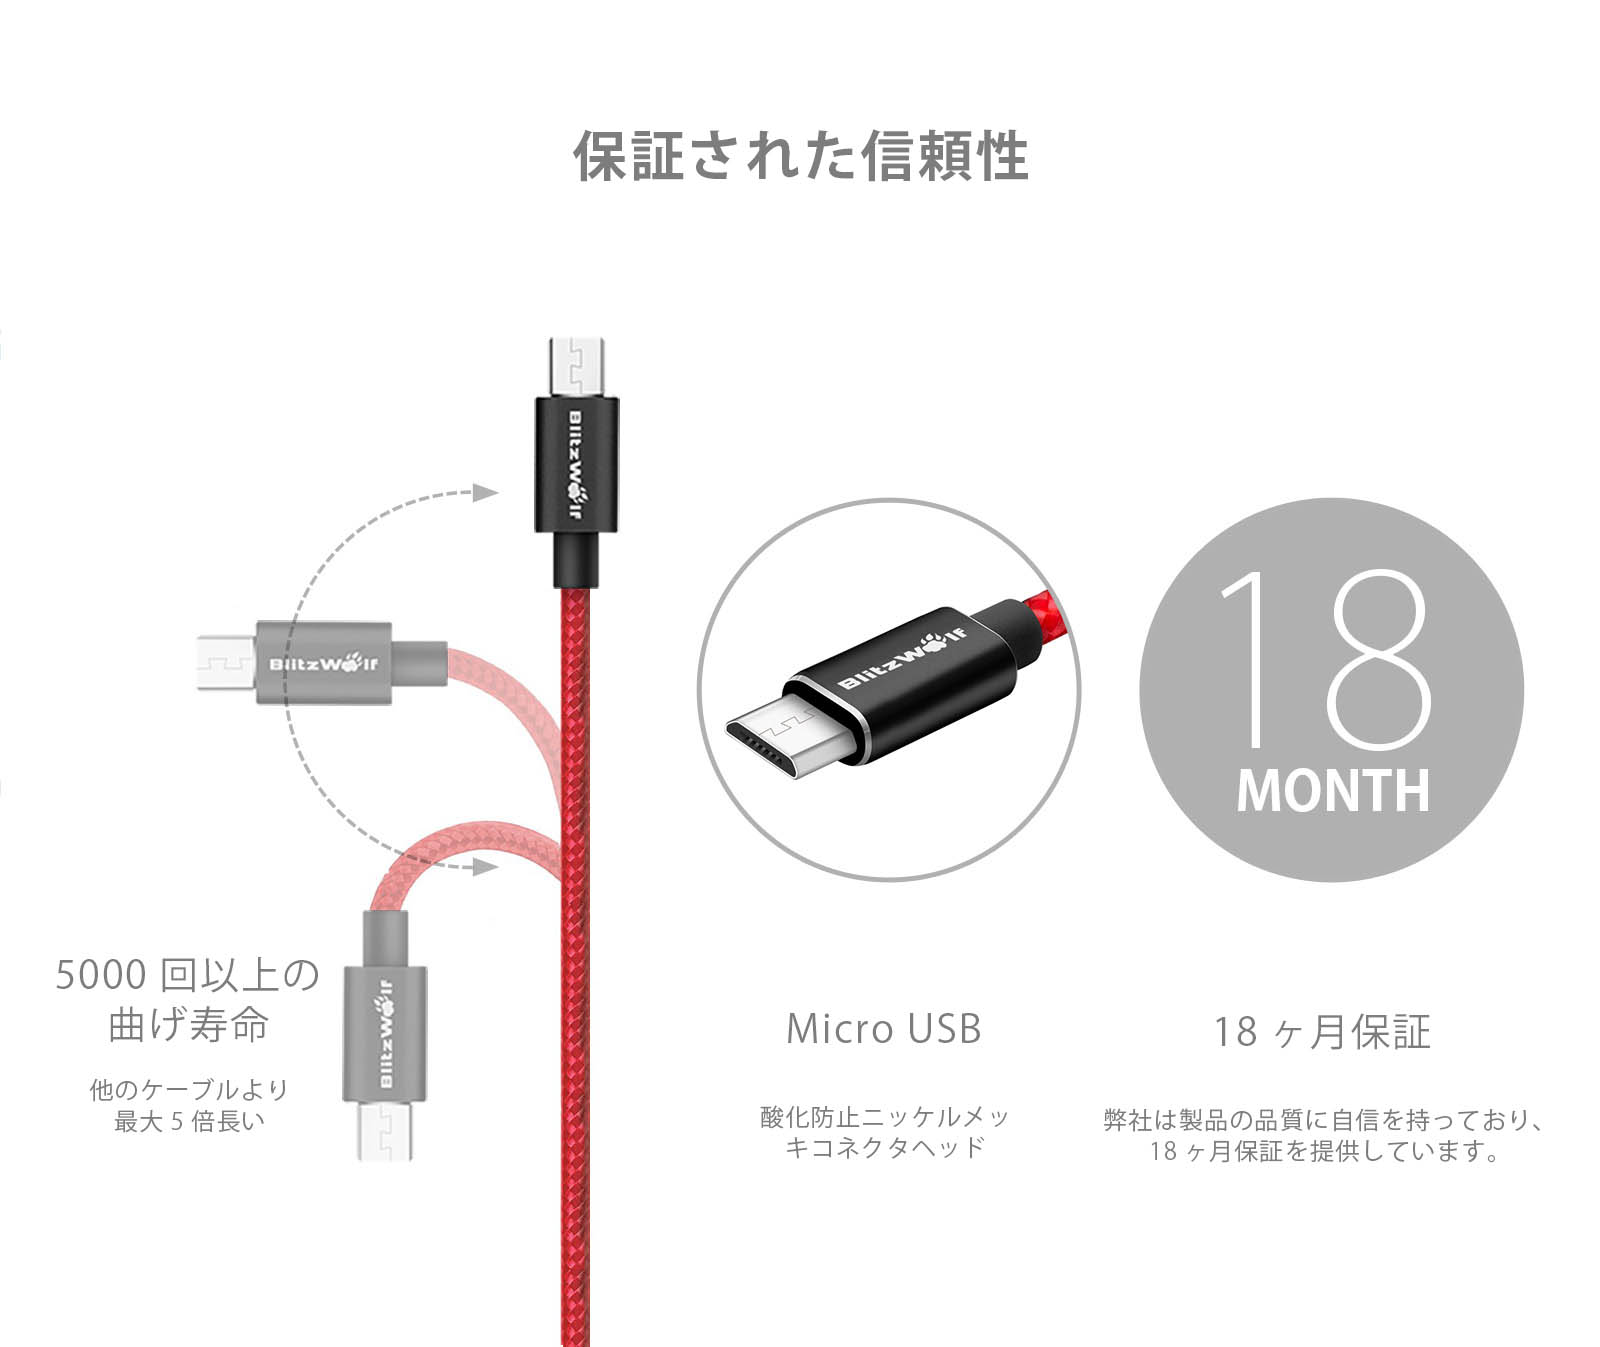 BlitzWolfreg-BW-MC1-Data-Cable-Durable-Micro-USB-Fast-Charging-For-Xiaomi-Nexus-LG-Android-Smartphon-1117566